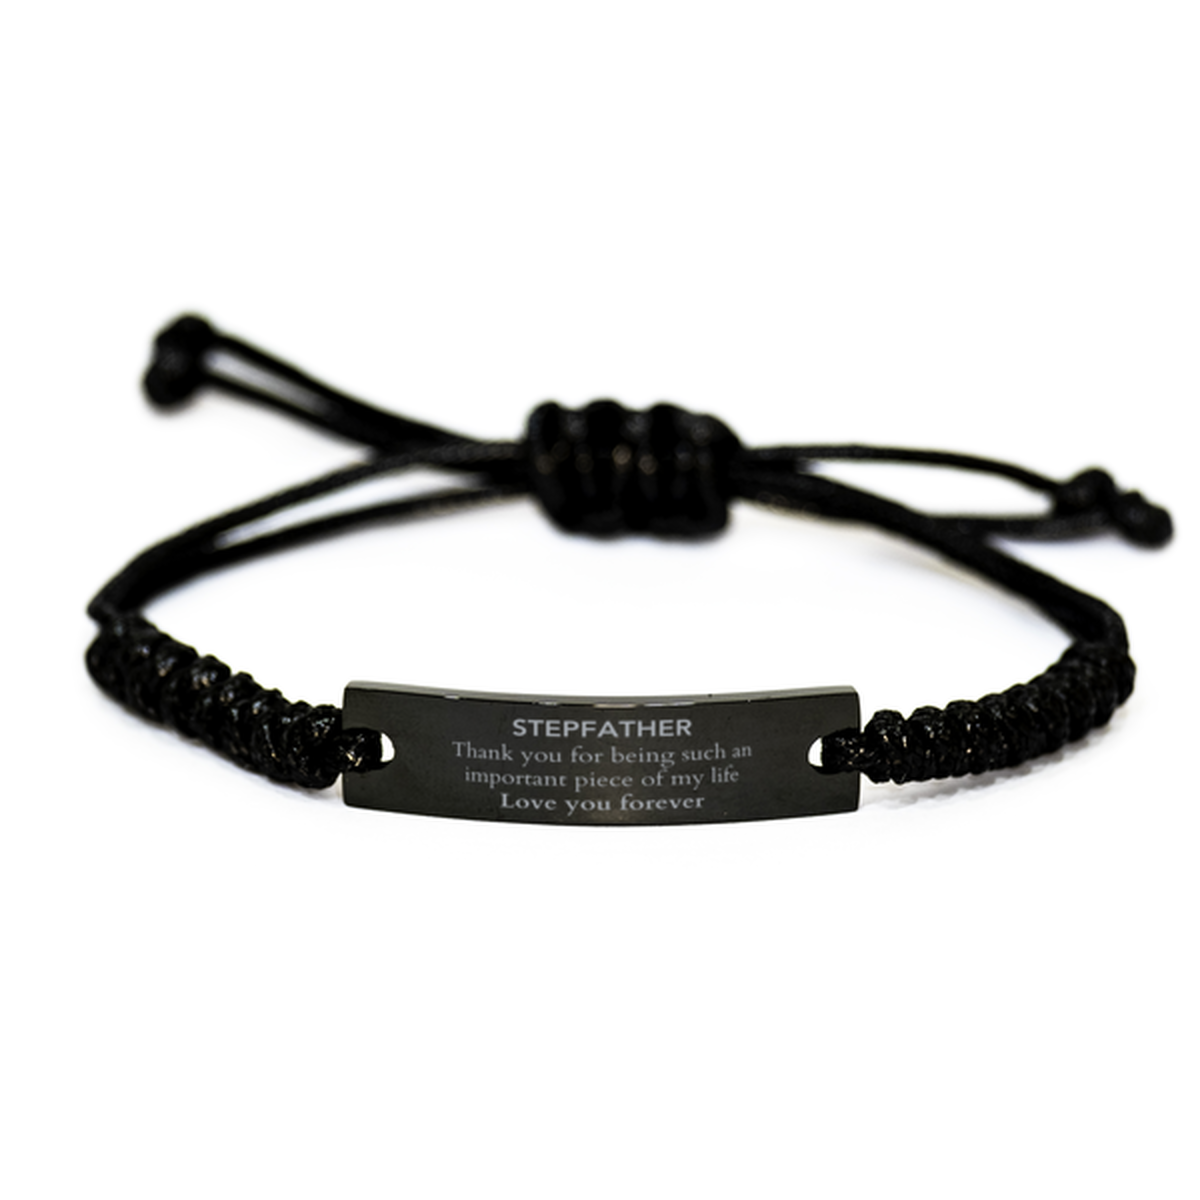 Appropriate Stepfather Black Rope Bracelet Epic Birthday Gifts for Stepfather Thank you for being such an important piece of my life Stepfather Christmas Mothers Fathers Day